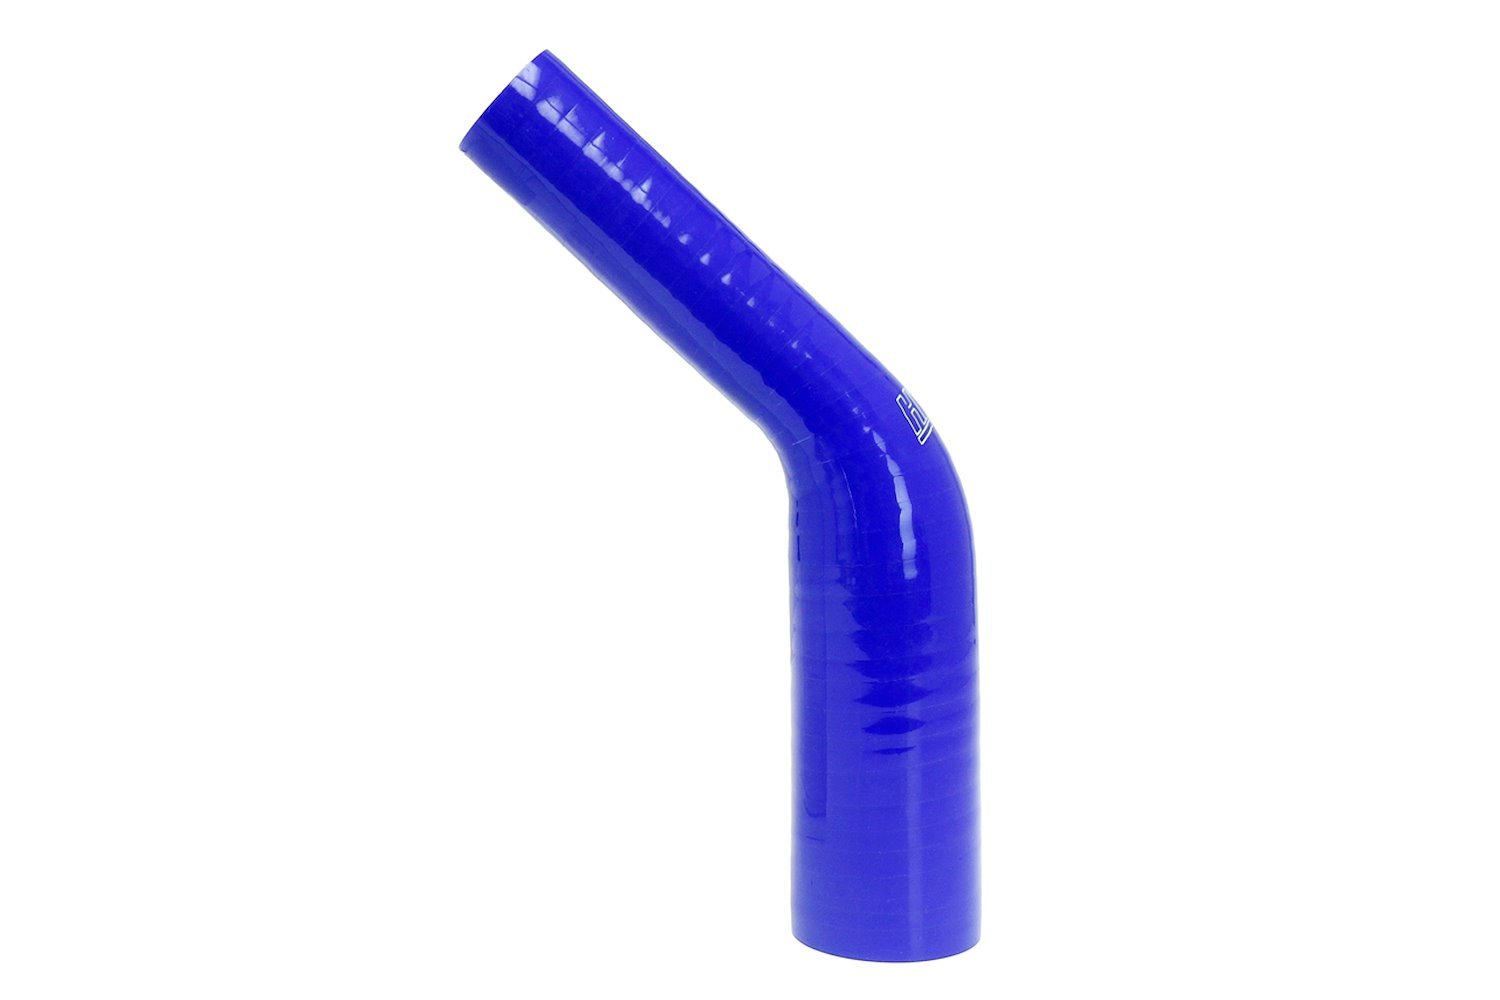 HTSER45-175-250-BLUE Silicone 45-Degree Elbow Hose, High-Temp 4-Ply Reinforced, 1-3/4 in. - 2-1/2 in. ID, Blue